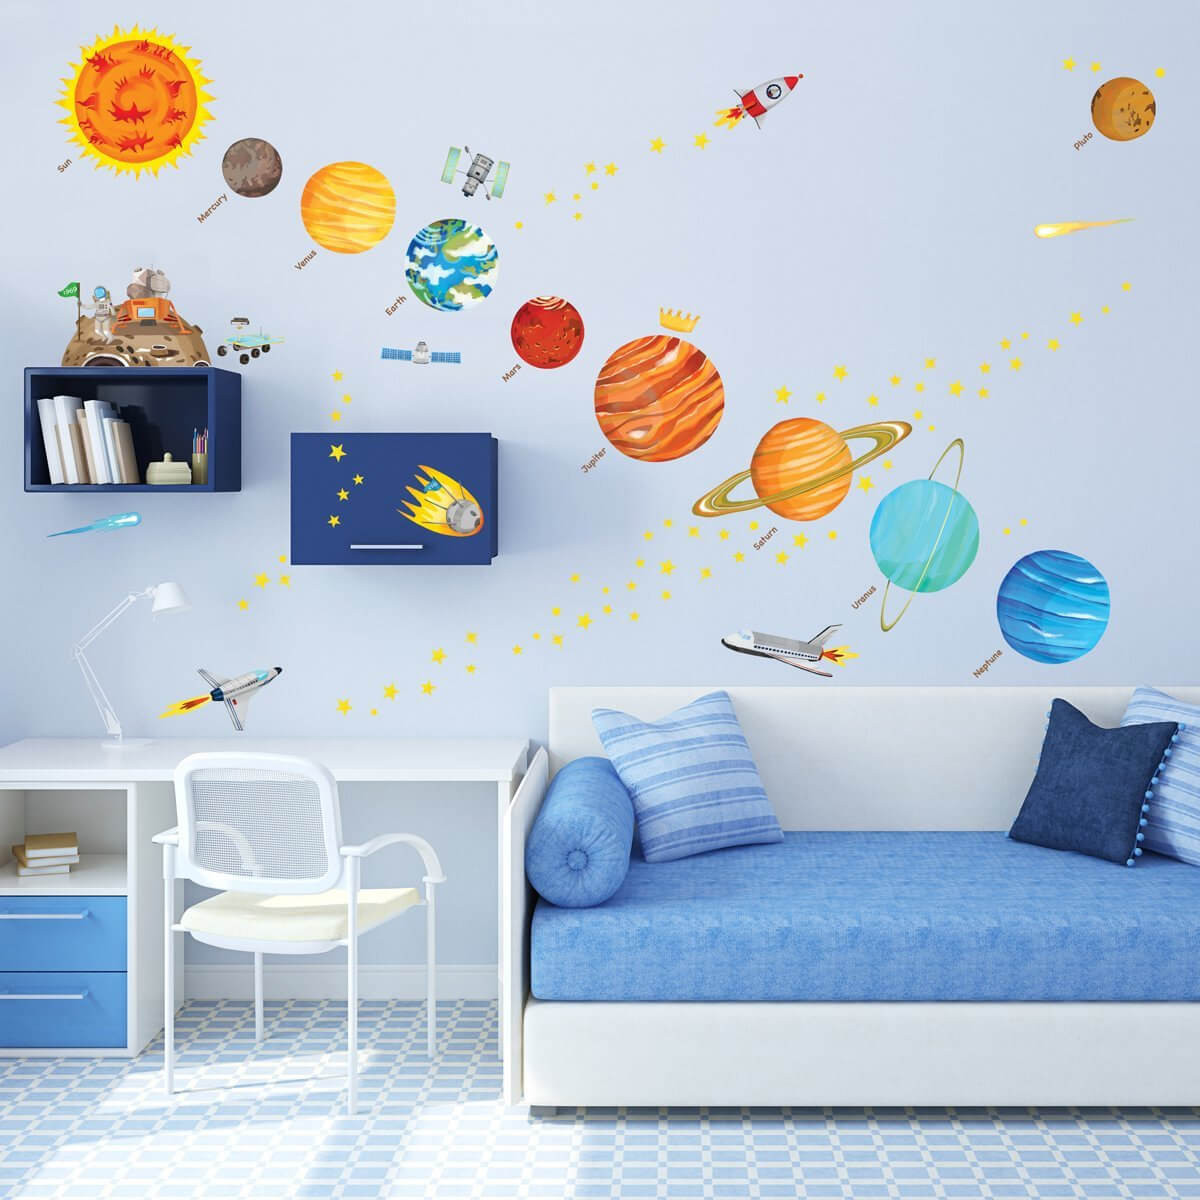 Wall Decoration Kids Room
 These Educational Wall Ideas are Perfect for Kids